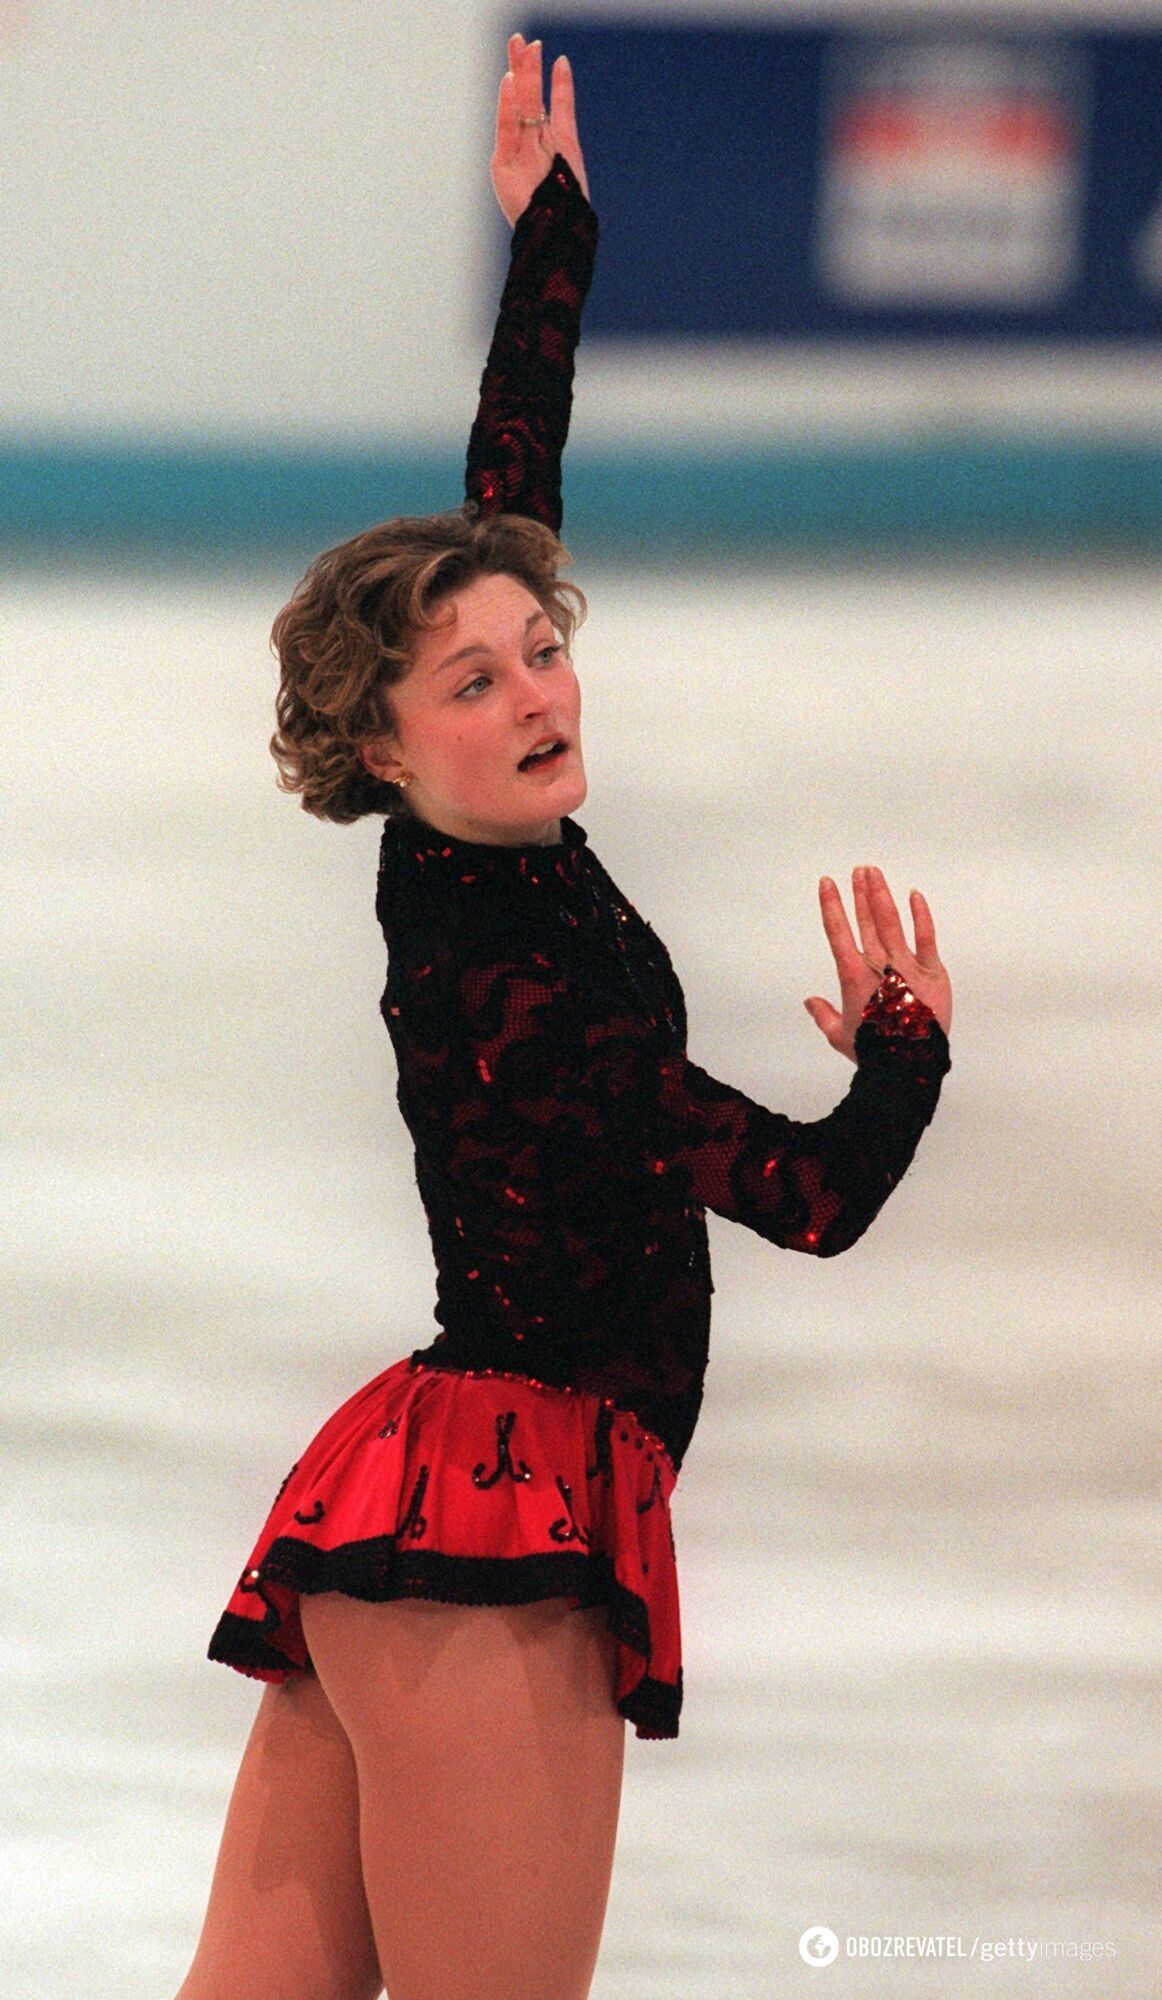 The Ukrainian figure skater, Yuliia Lavrenchuk, residing in Russia, allegedly assaulted a child, causing upset, including Evgeni Plushenko